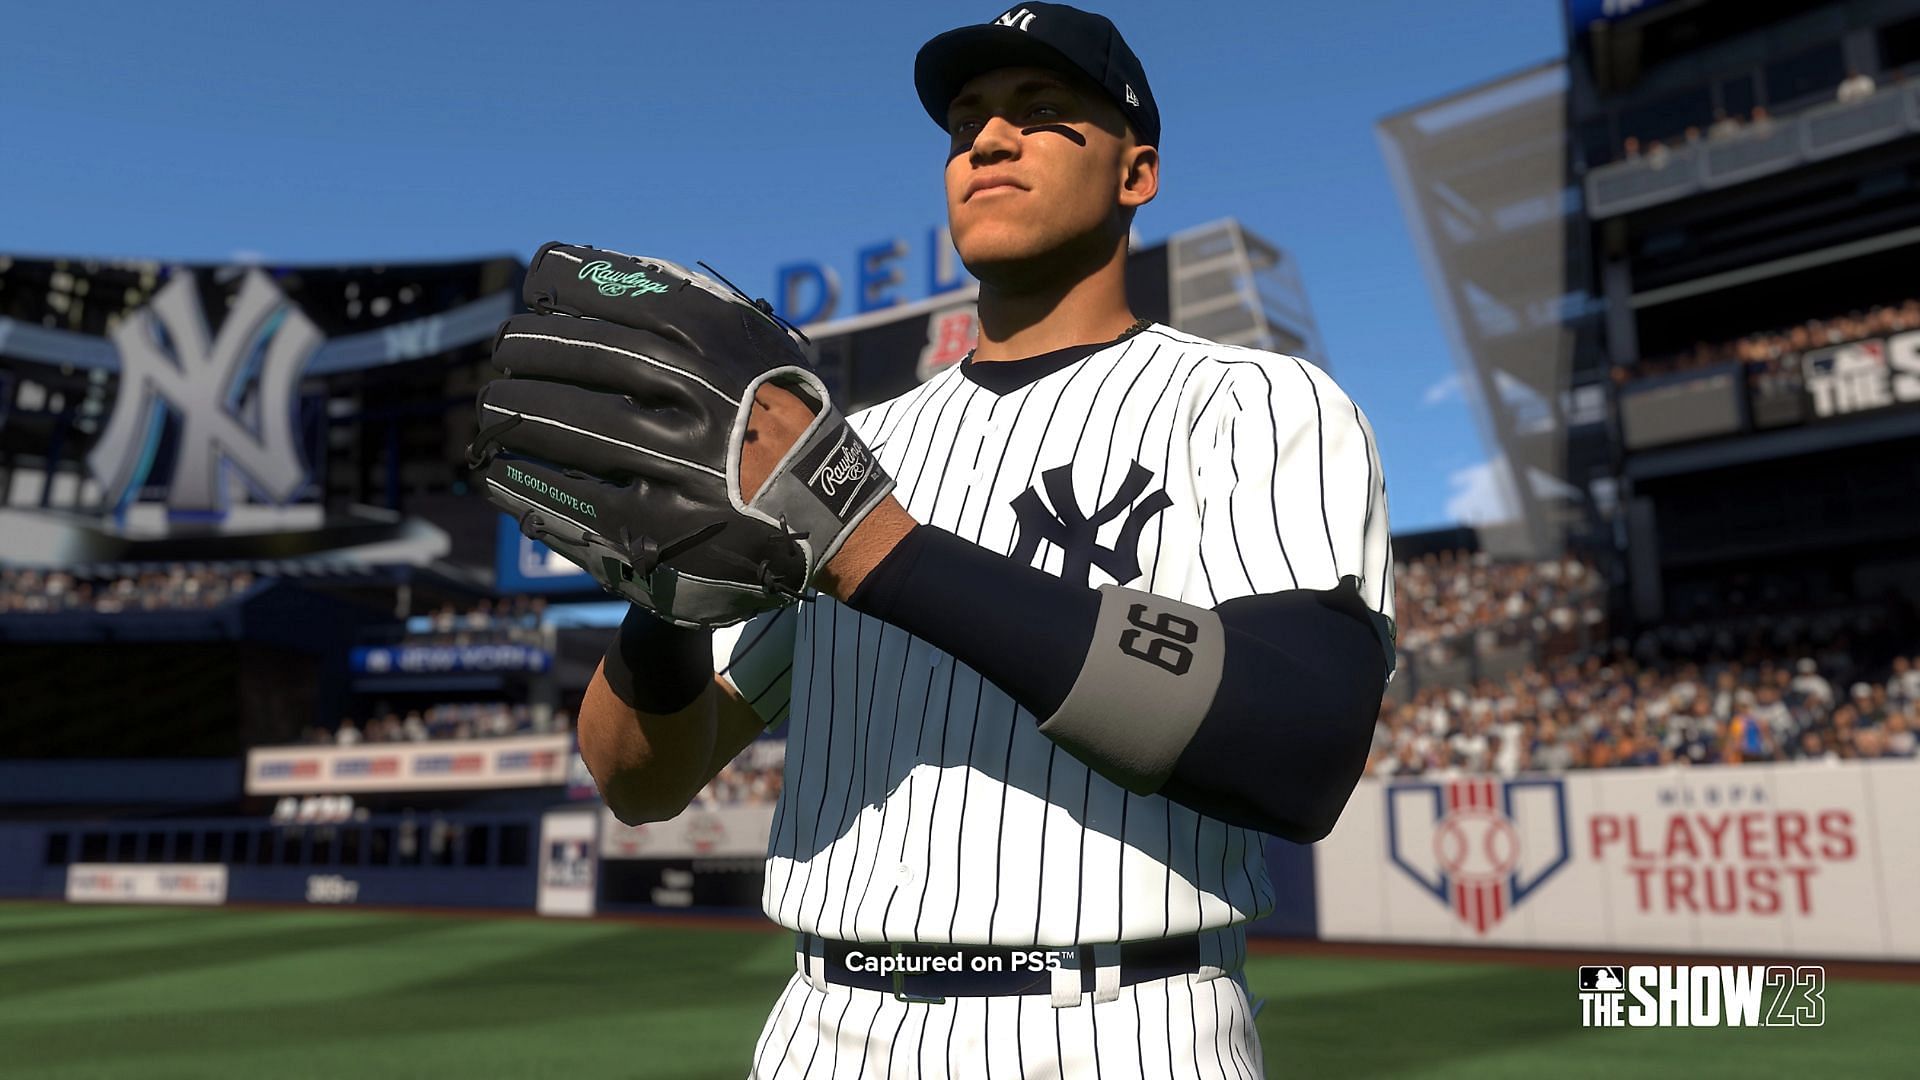 MLB The Show 23 requires great finesse and skill in throws, but how can players get consistent at them? (Image via Sony)